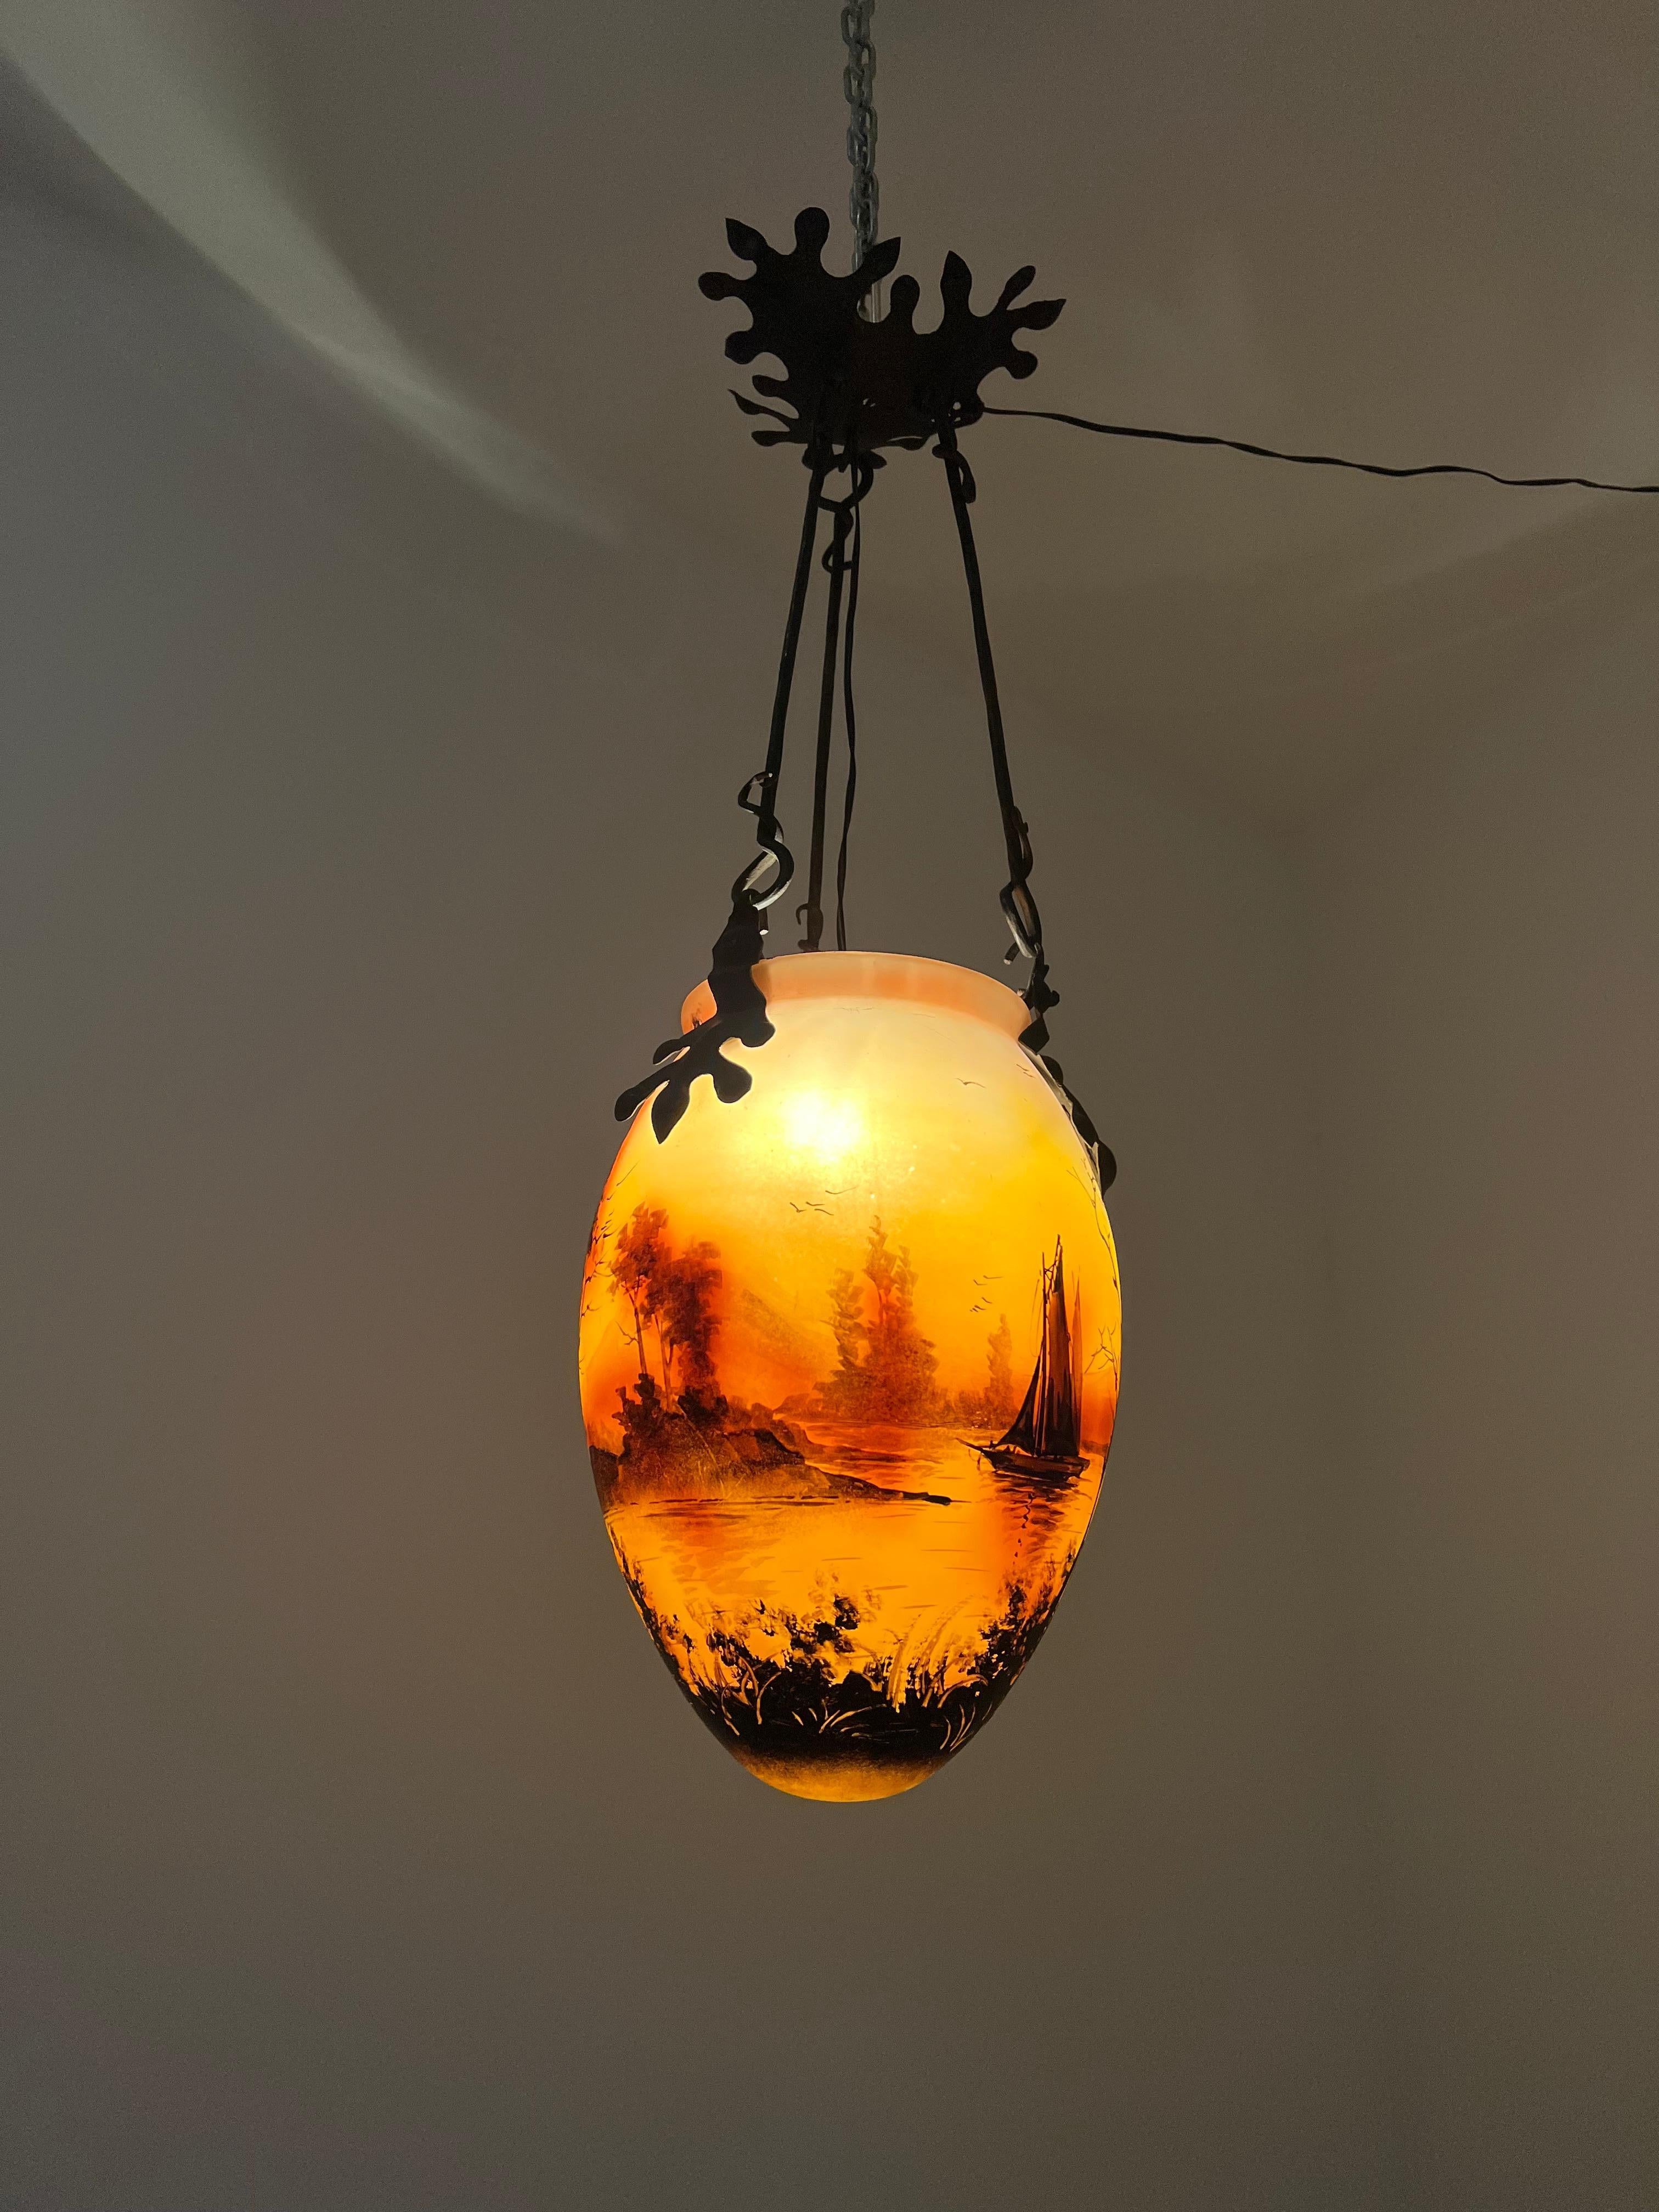 Small pendant light manufactured in France circa 1900 in hand-forged Iron and pâte de verre glass.
The glass Vase is manufactured in the pâte de verre technique and hand decorated. It is signed 